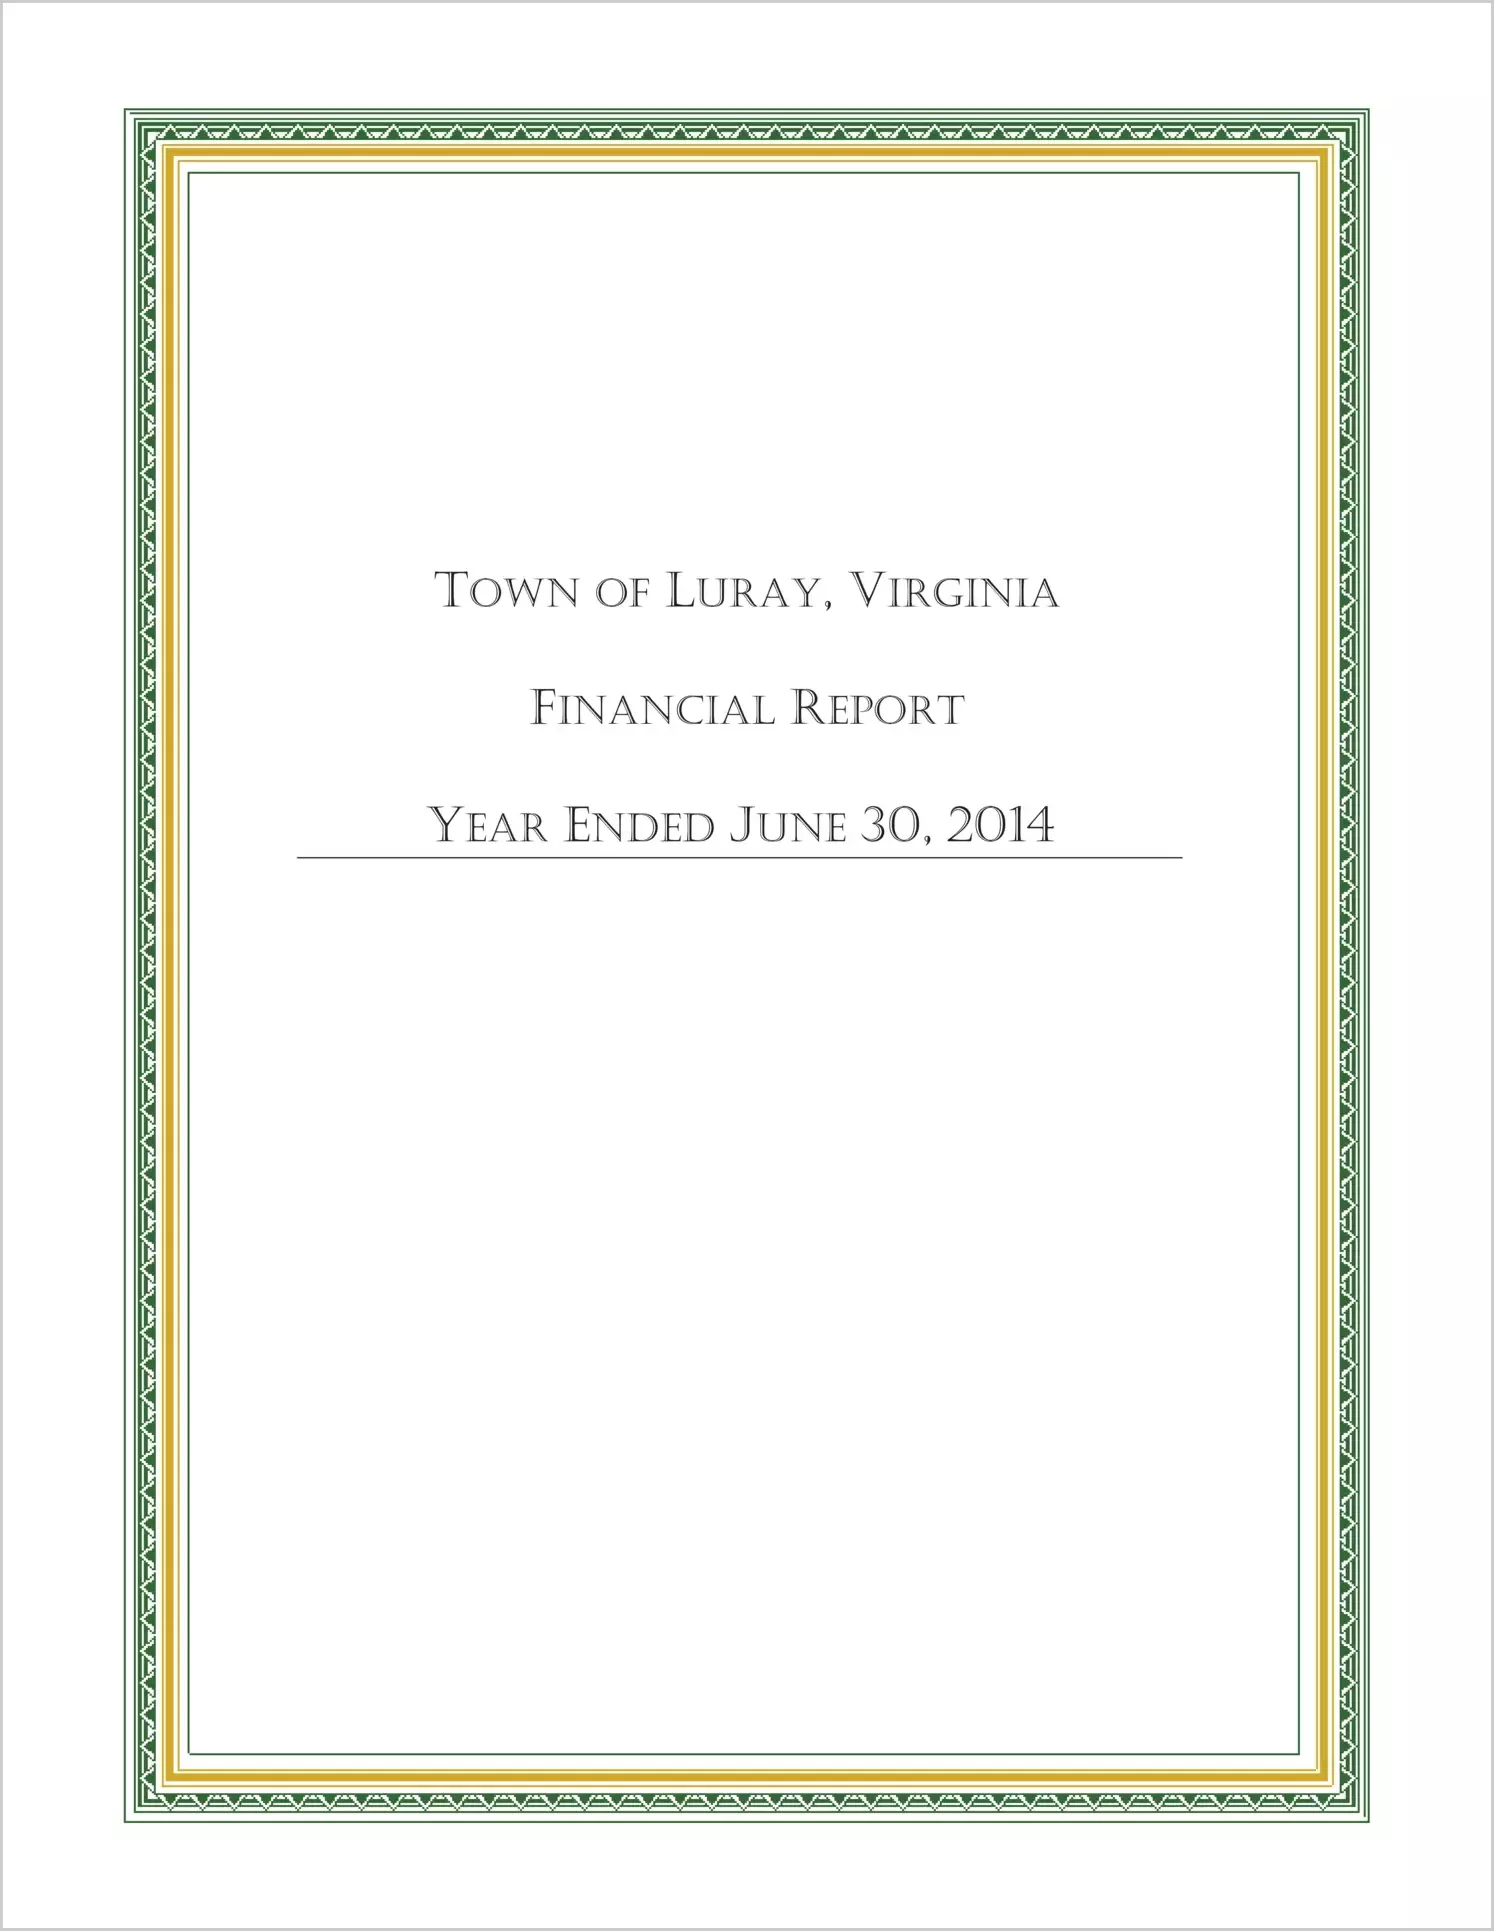 2014 Annual Financial Report for Town of Luray